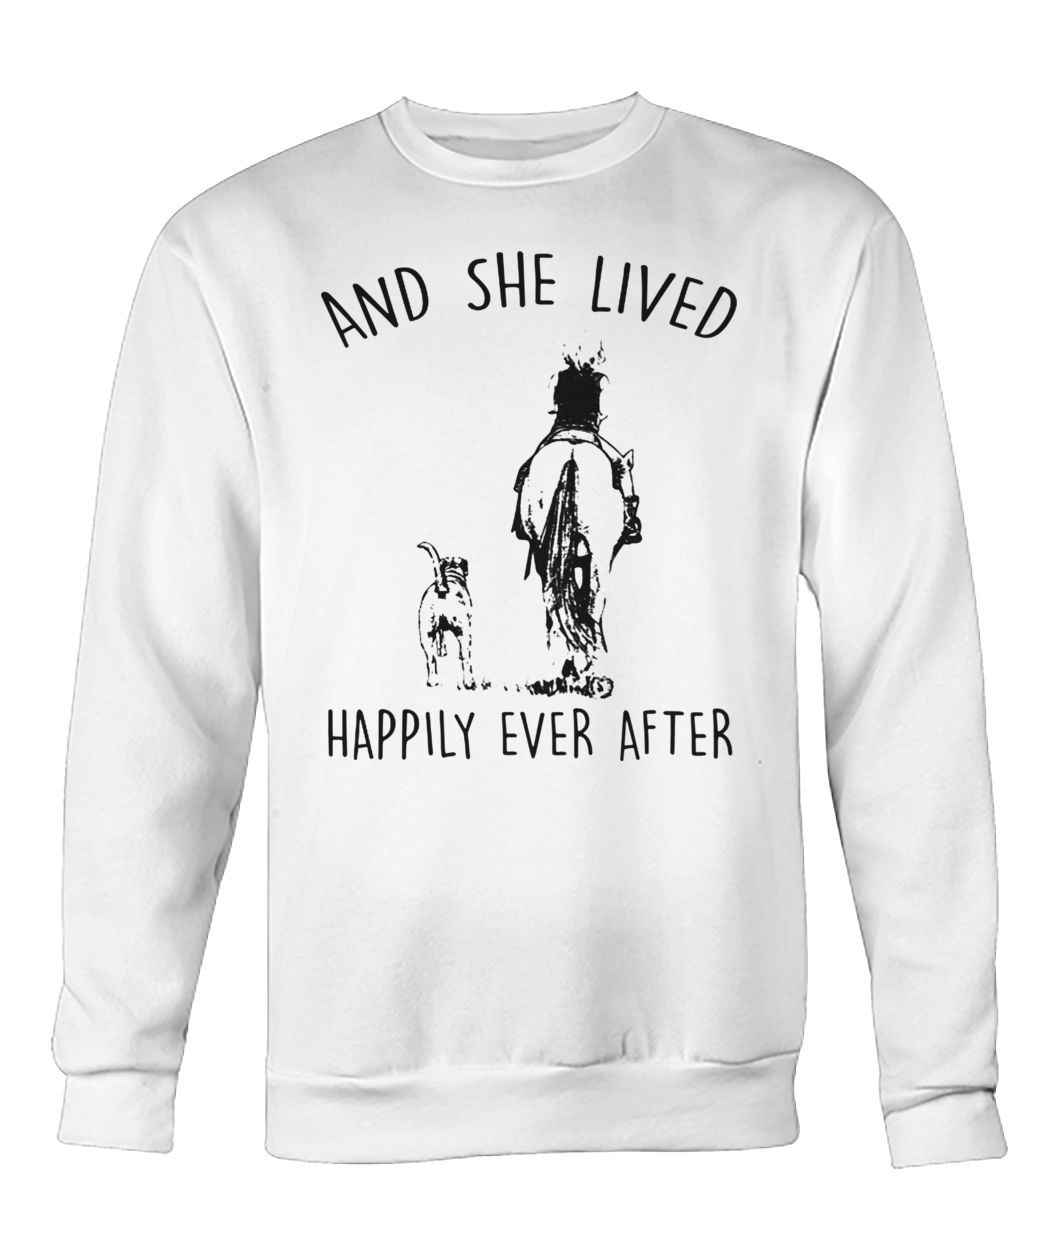 Horse and she lived happily ever after crew neck sweatshirt